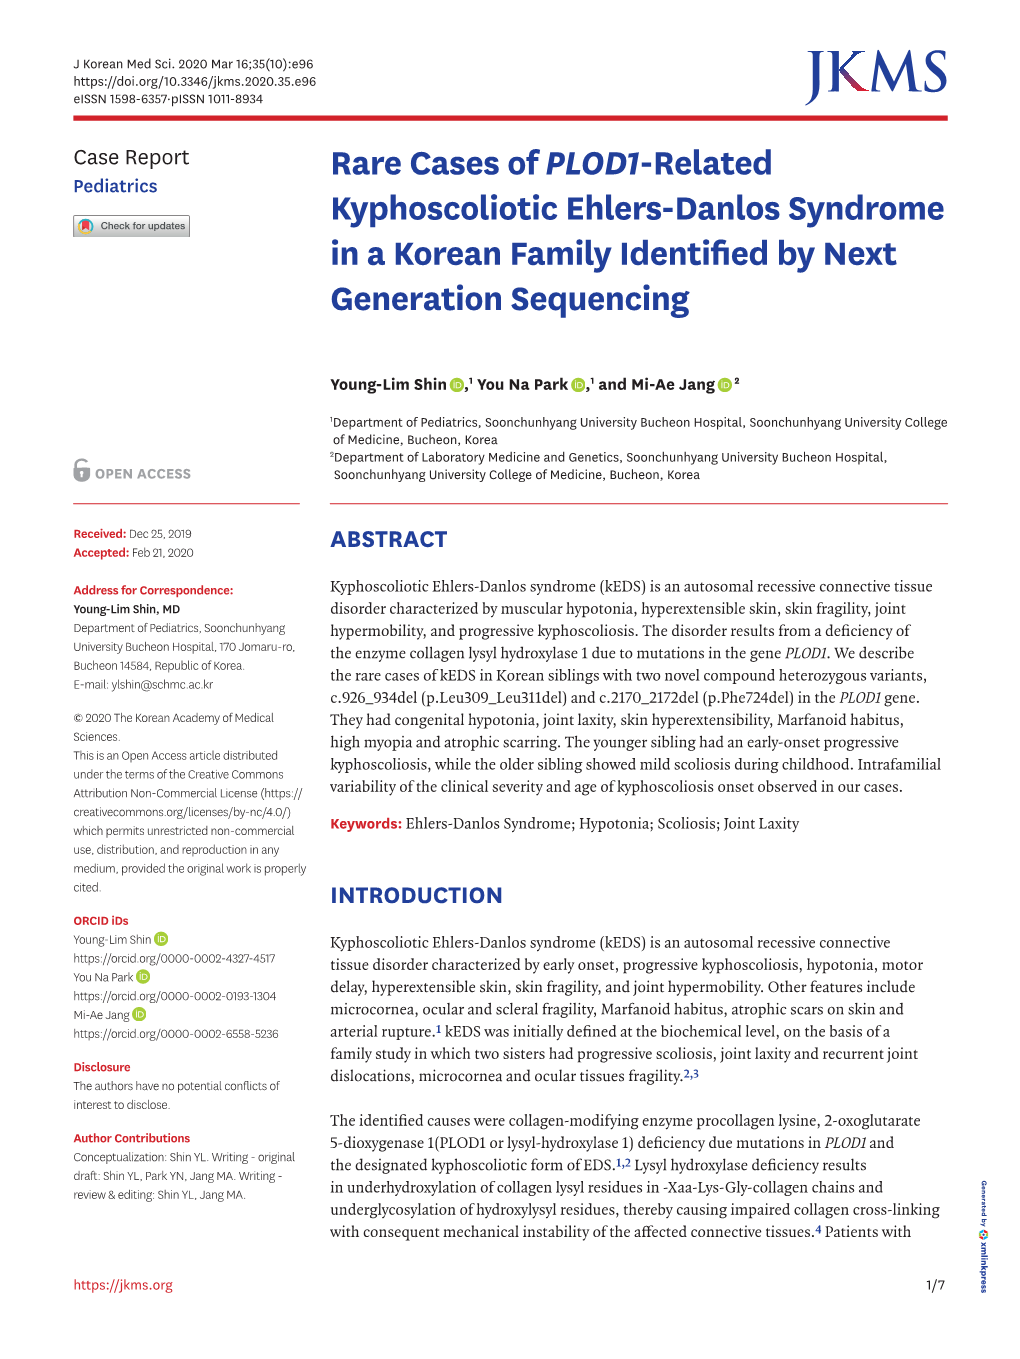 Rare Cases of PLOD1-Related Kyphoscoliotic Ehlers-Danlos Syndrome in a Korean Family Identified by Next Generation Sequencing